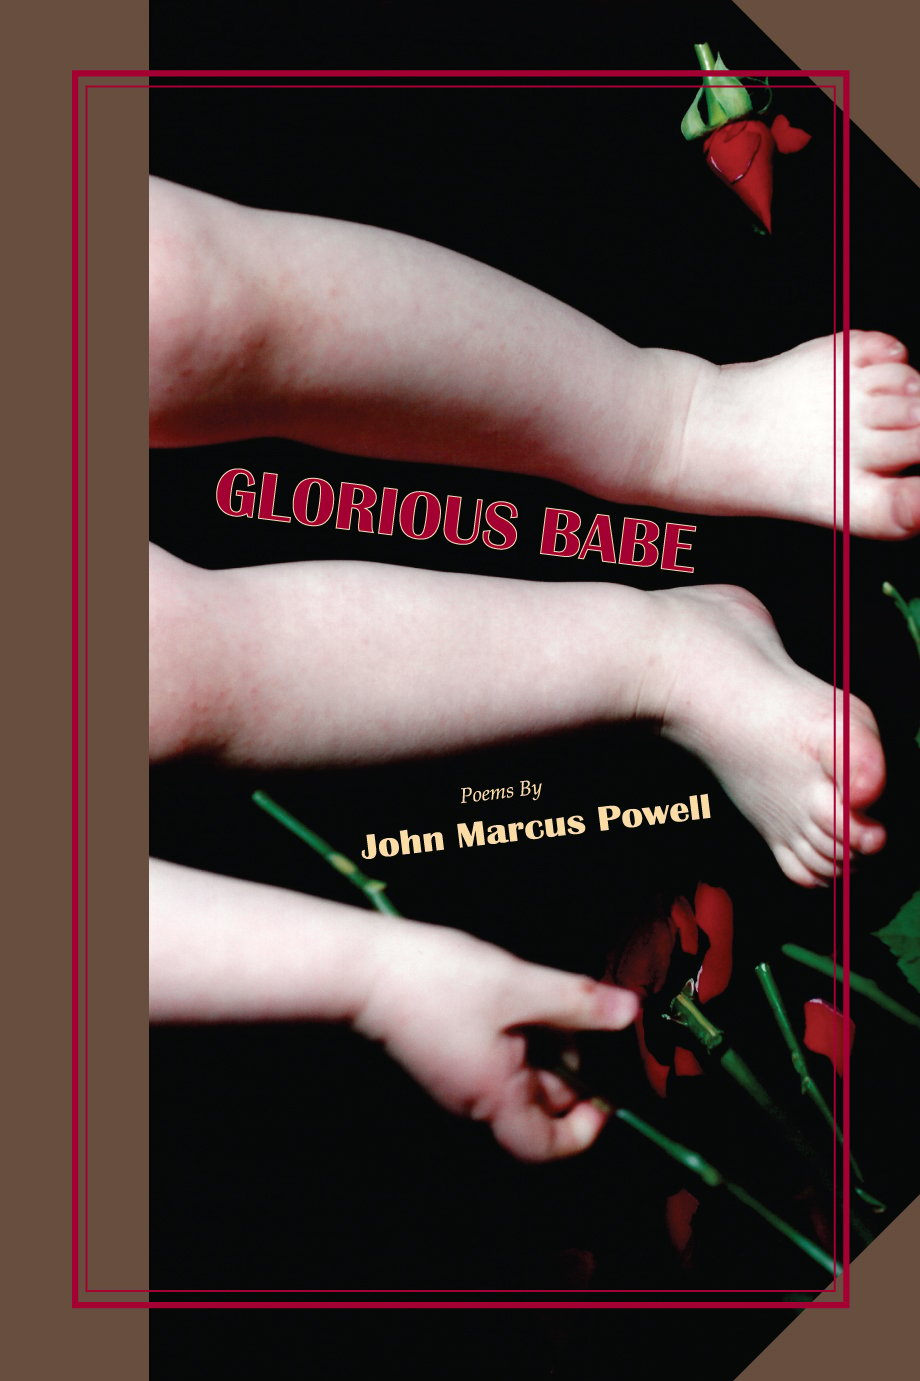 GLORIOUS BABE by John Marcus Powell